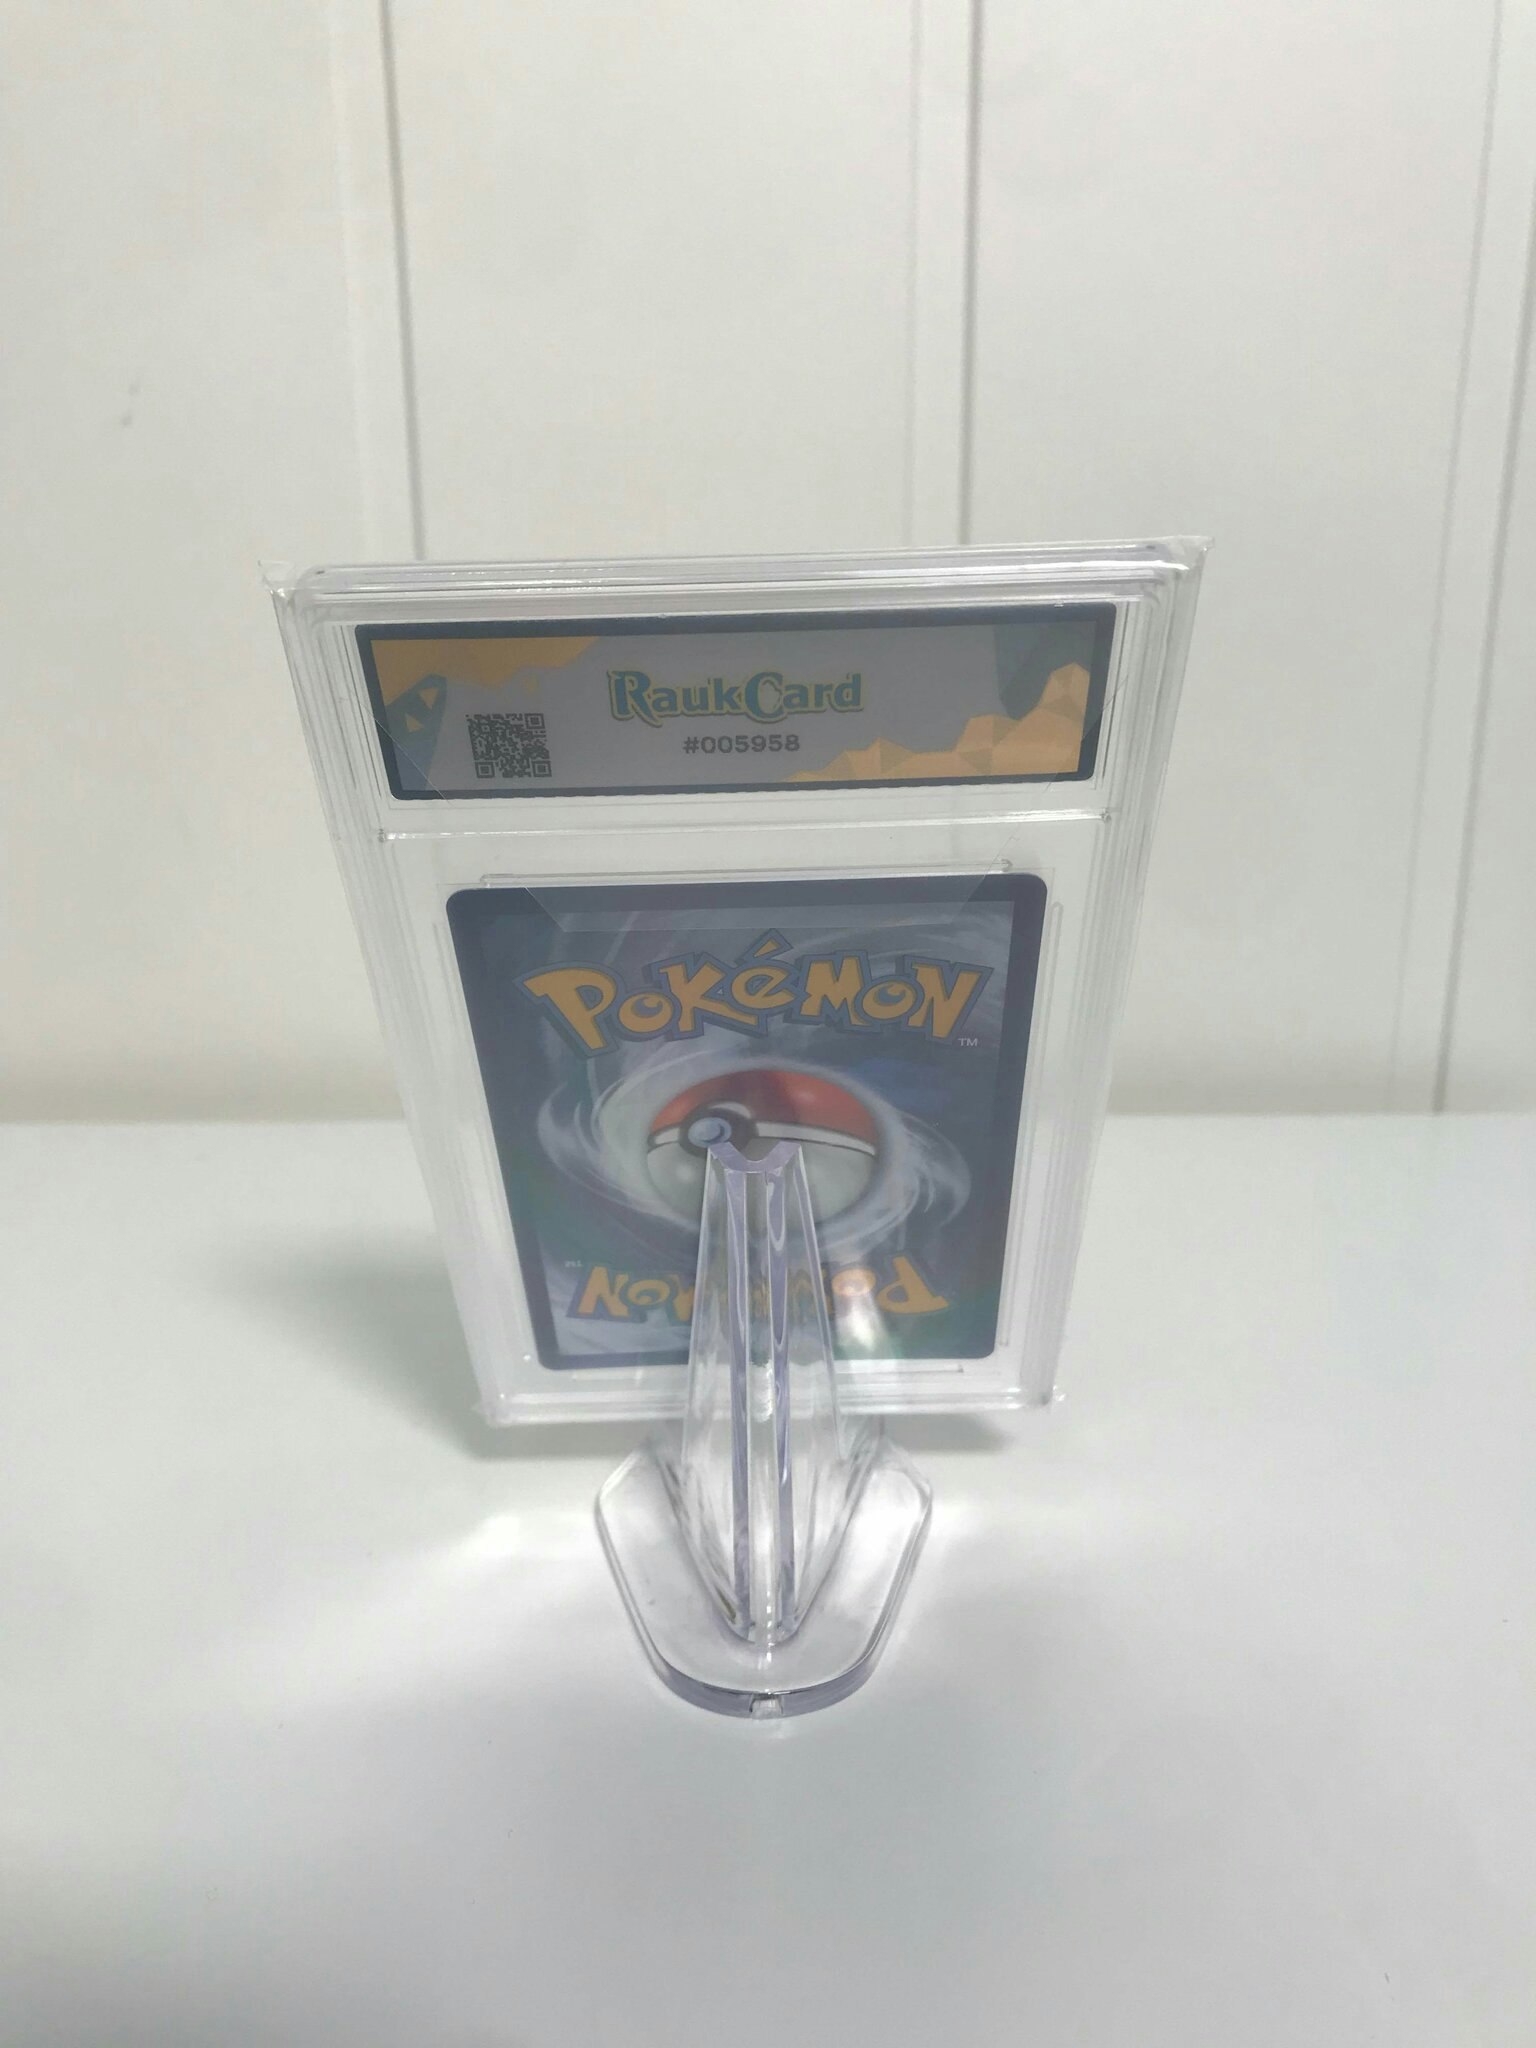 Graded Card Stands Model 2